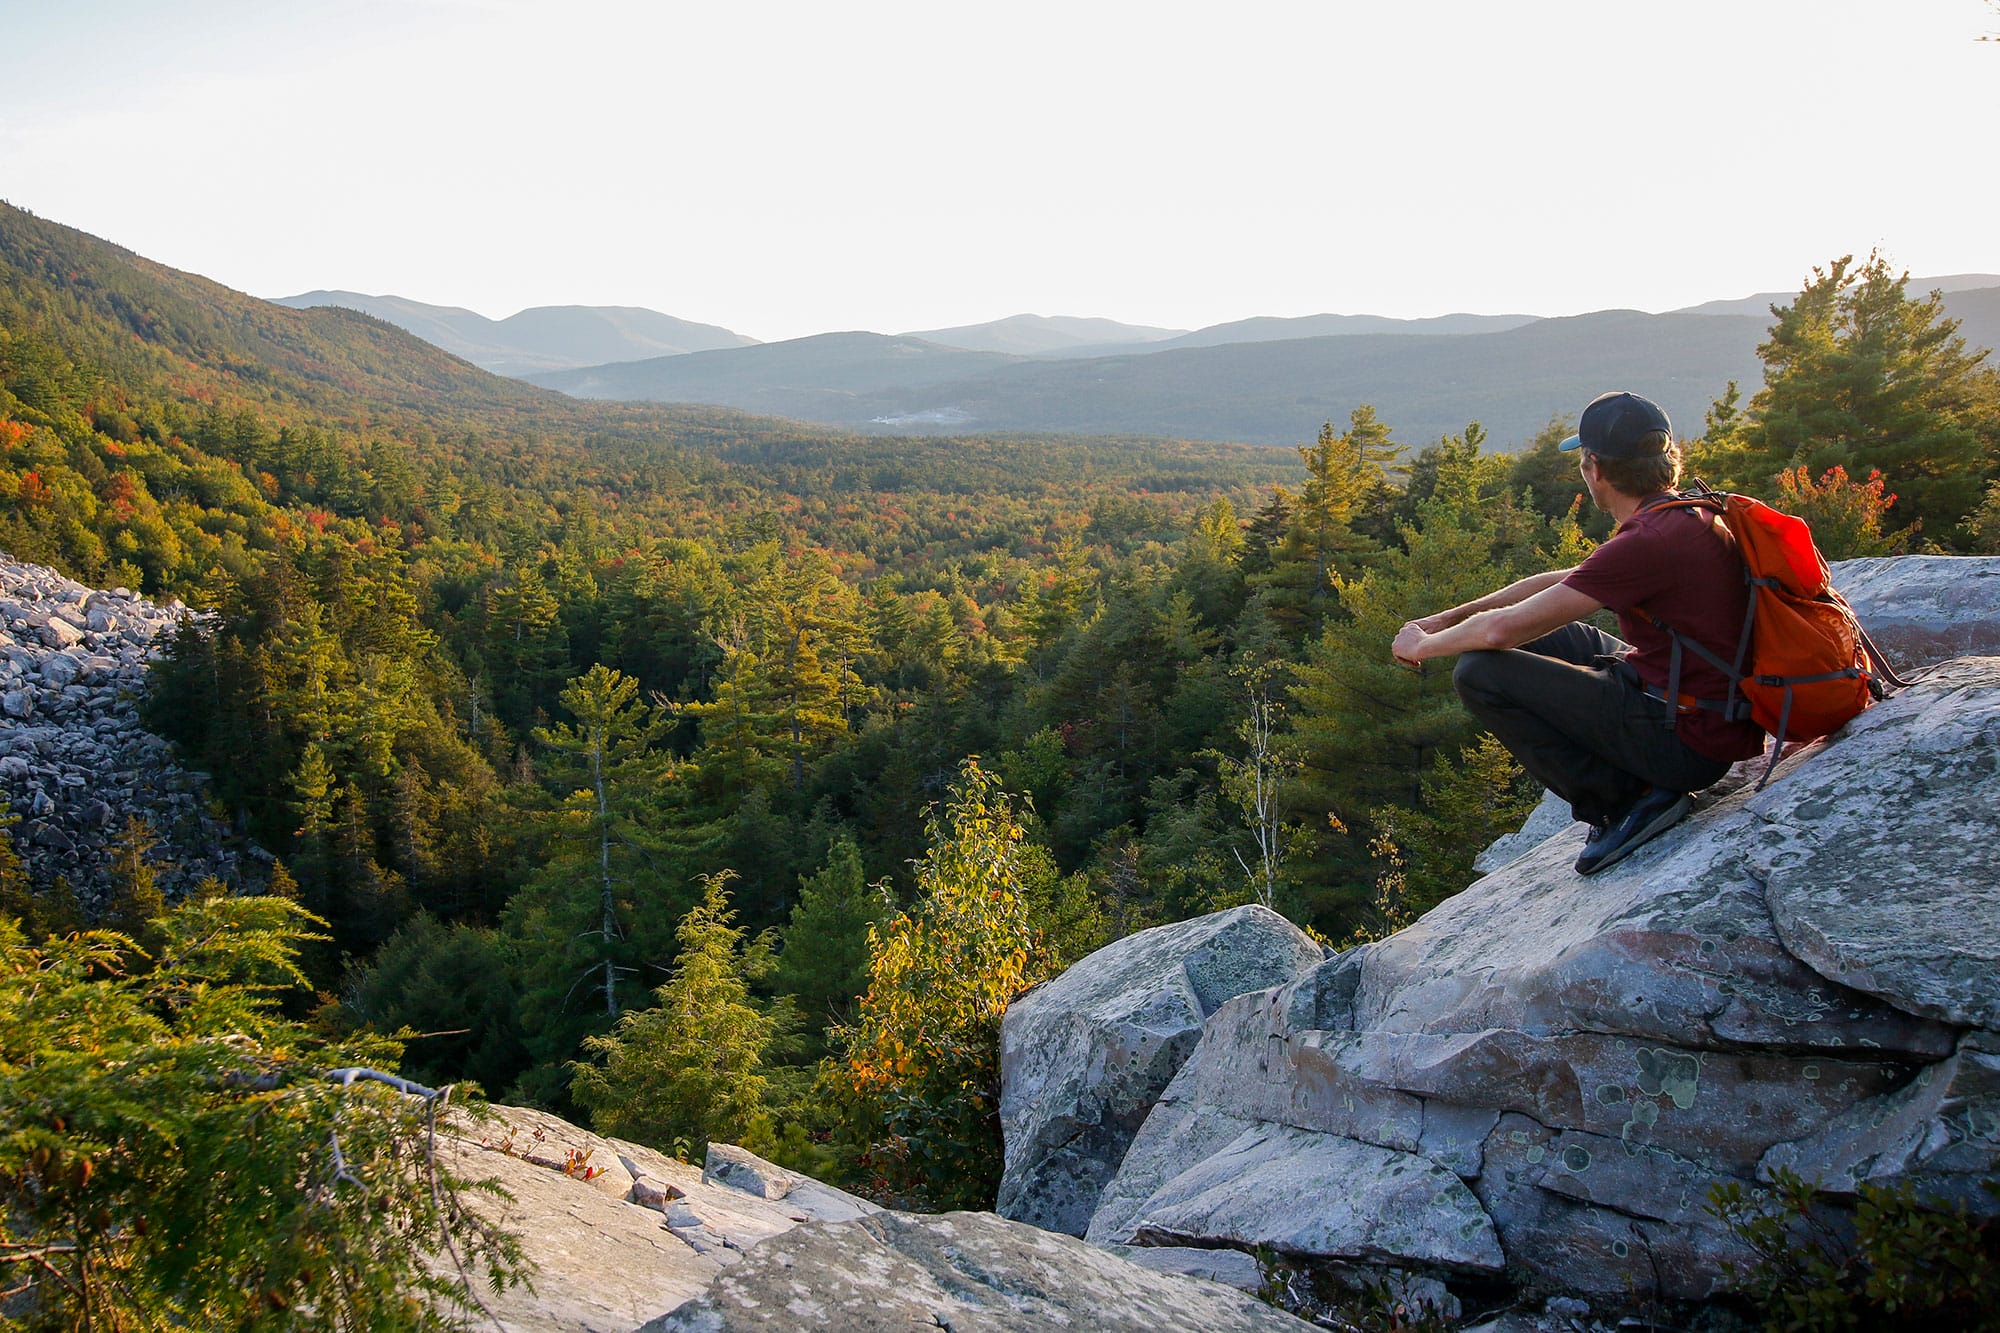 A man sitting on a rock overlooking a valley.